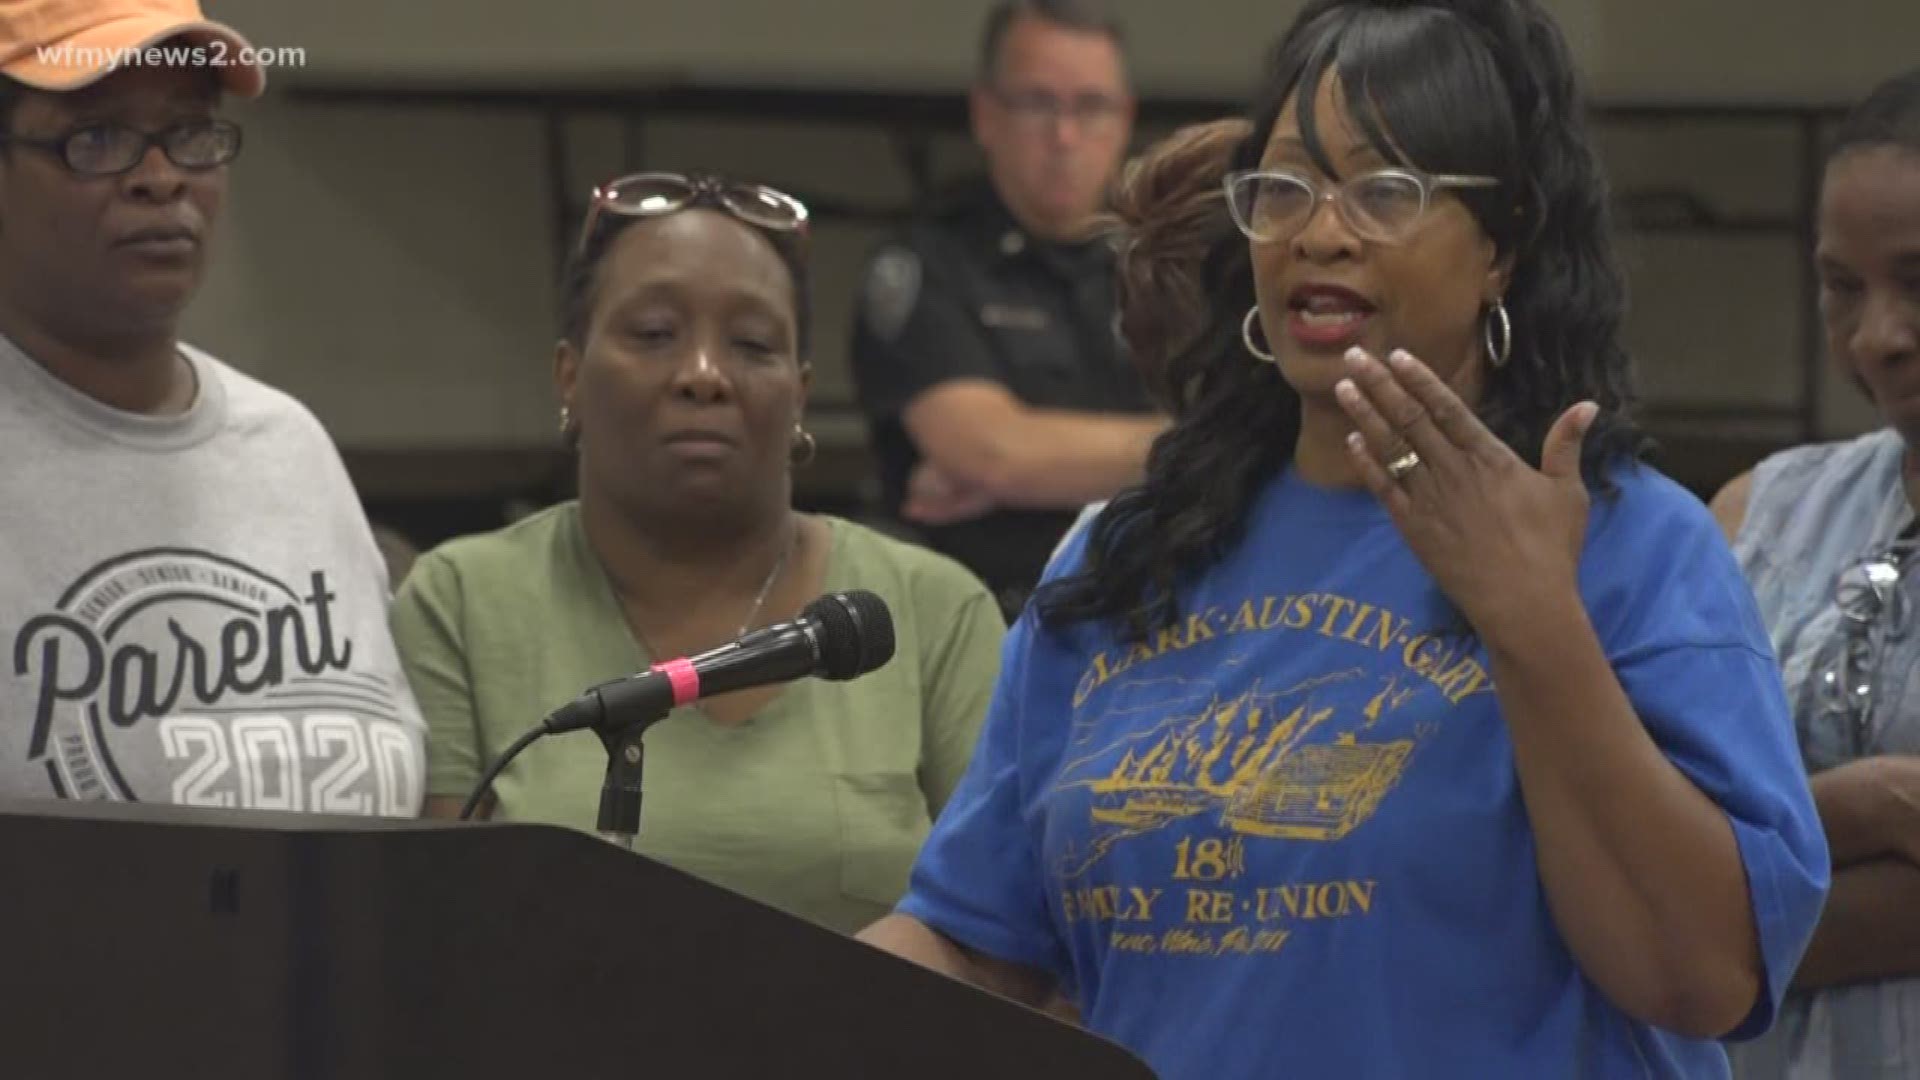 Families who lost sons and daughters came out to discuss ways to protect their other family members. City council members joined in the conversation.